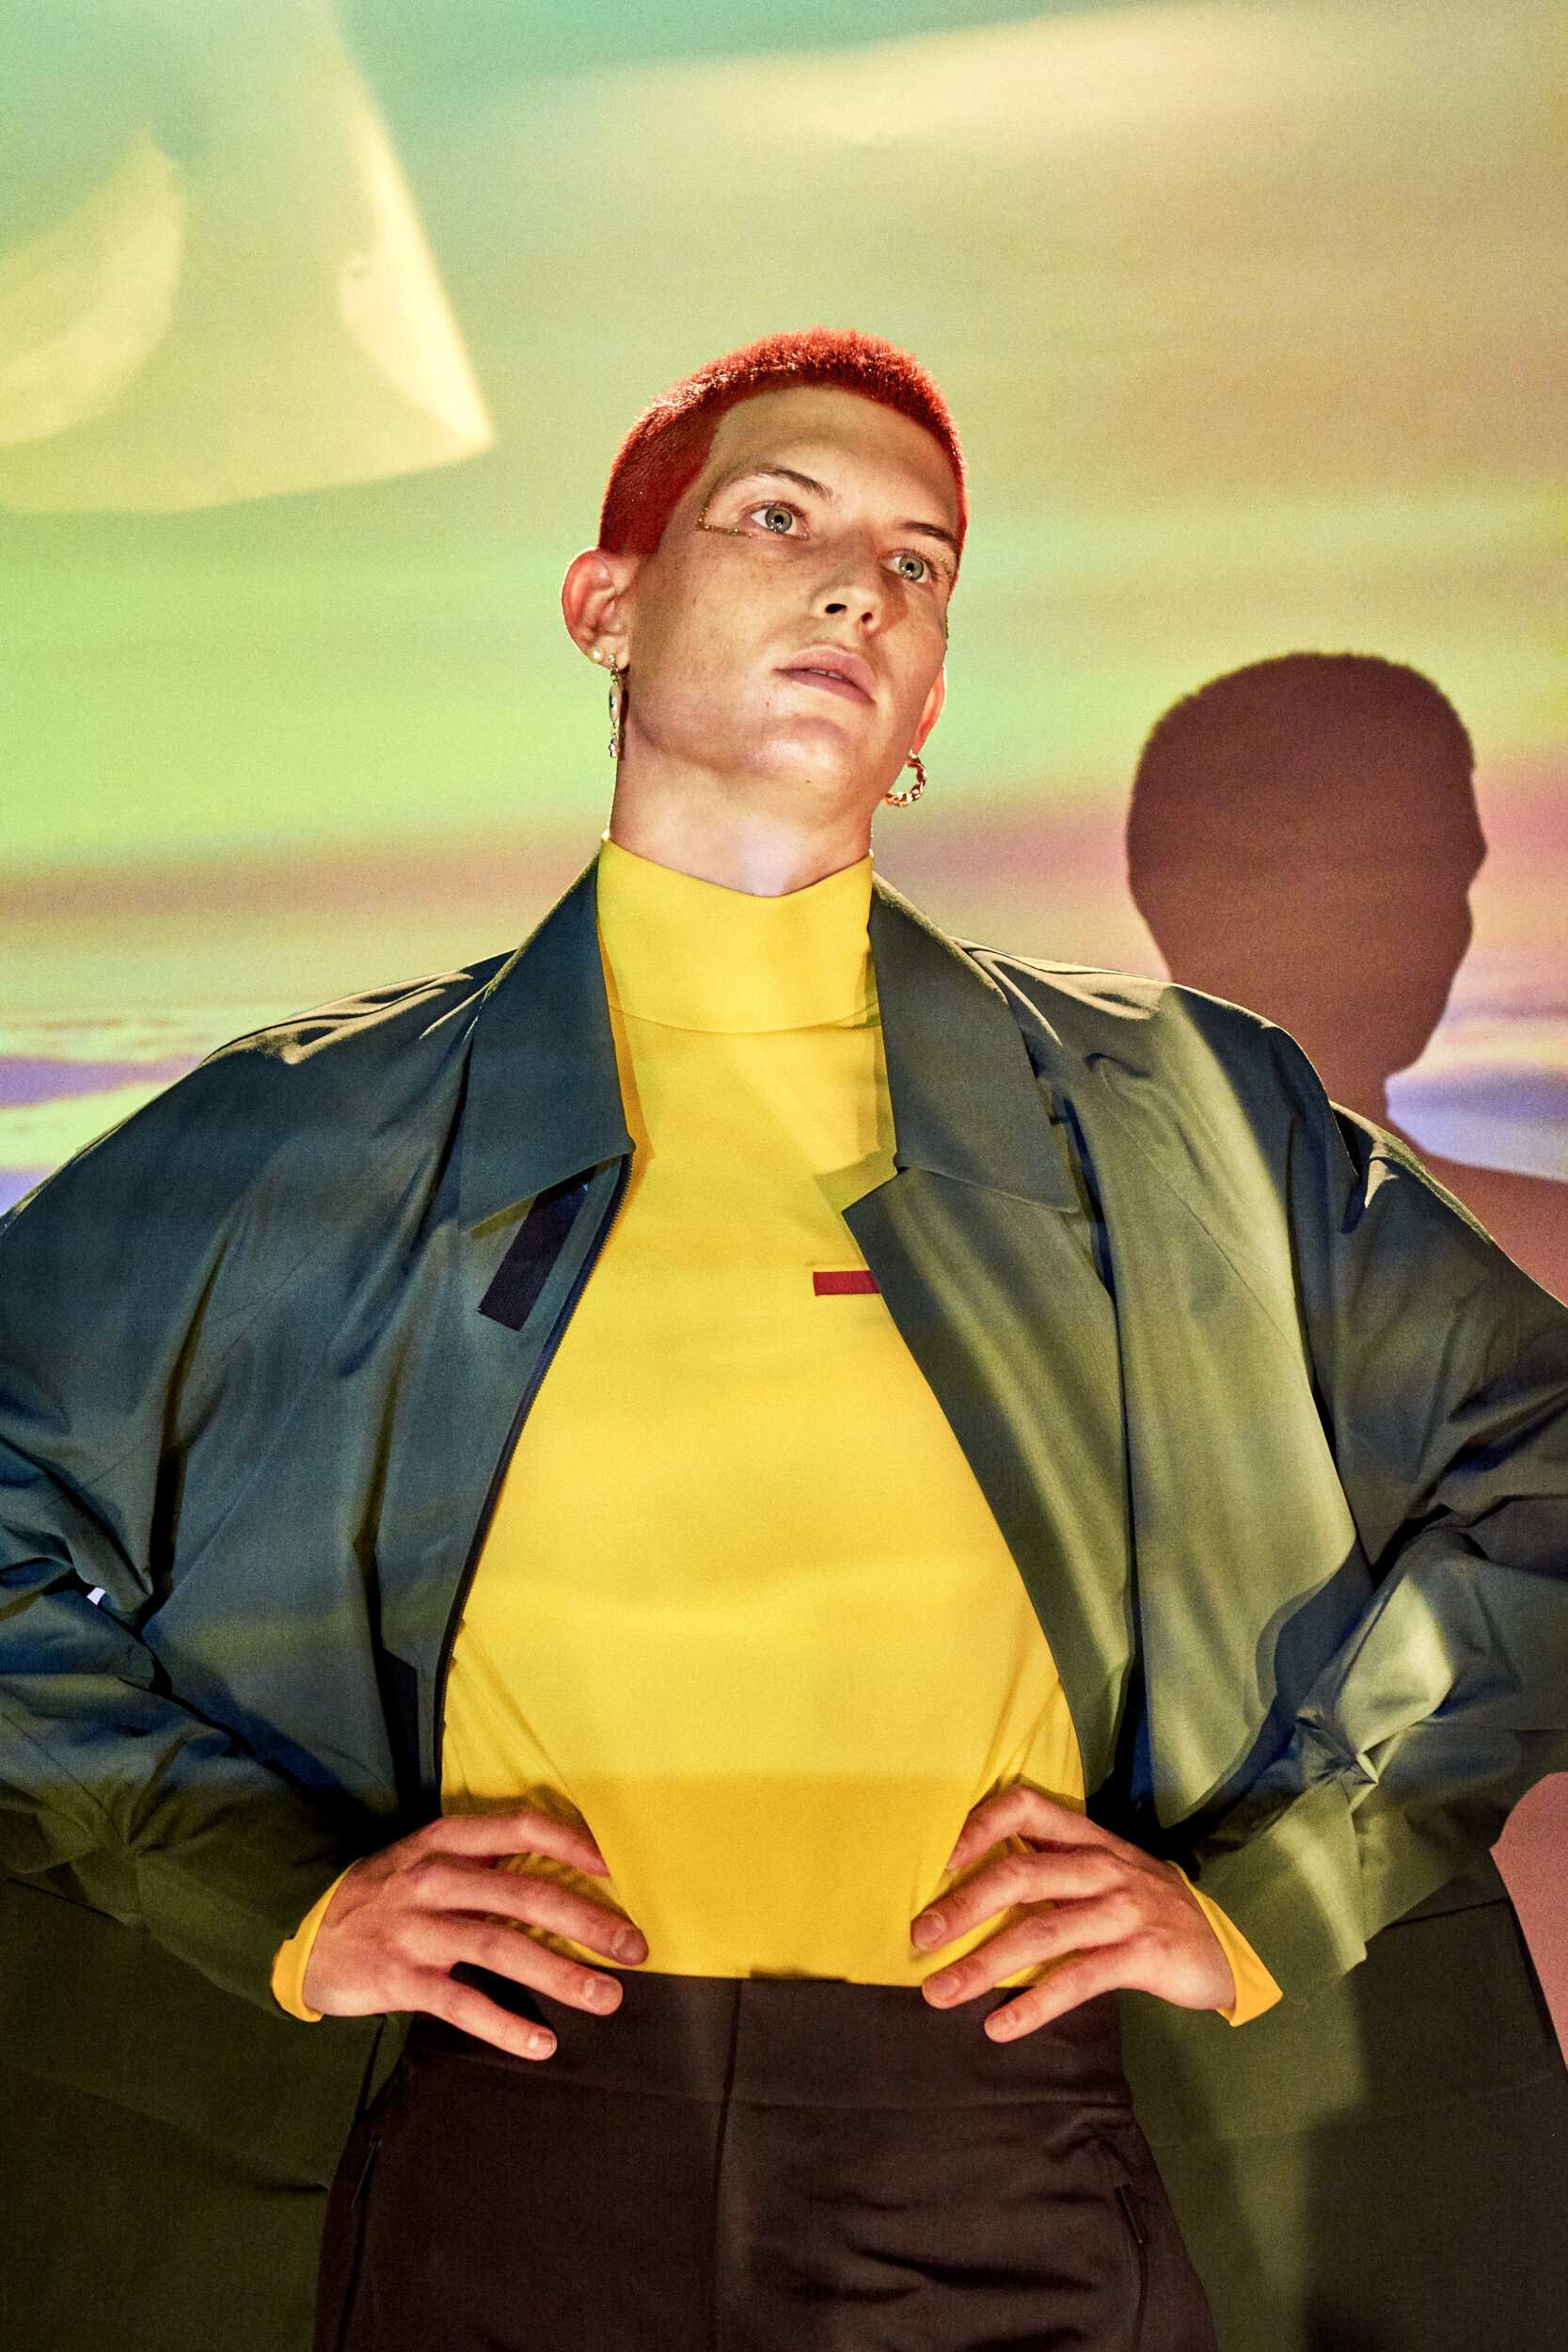   Gus Dapperton by Isaac Anthony for King Kong Garcon  